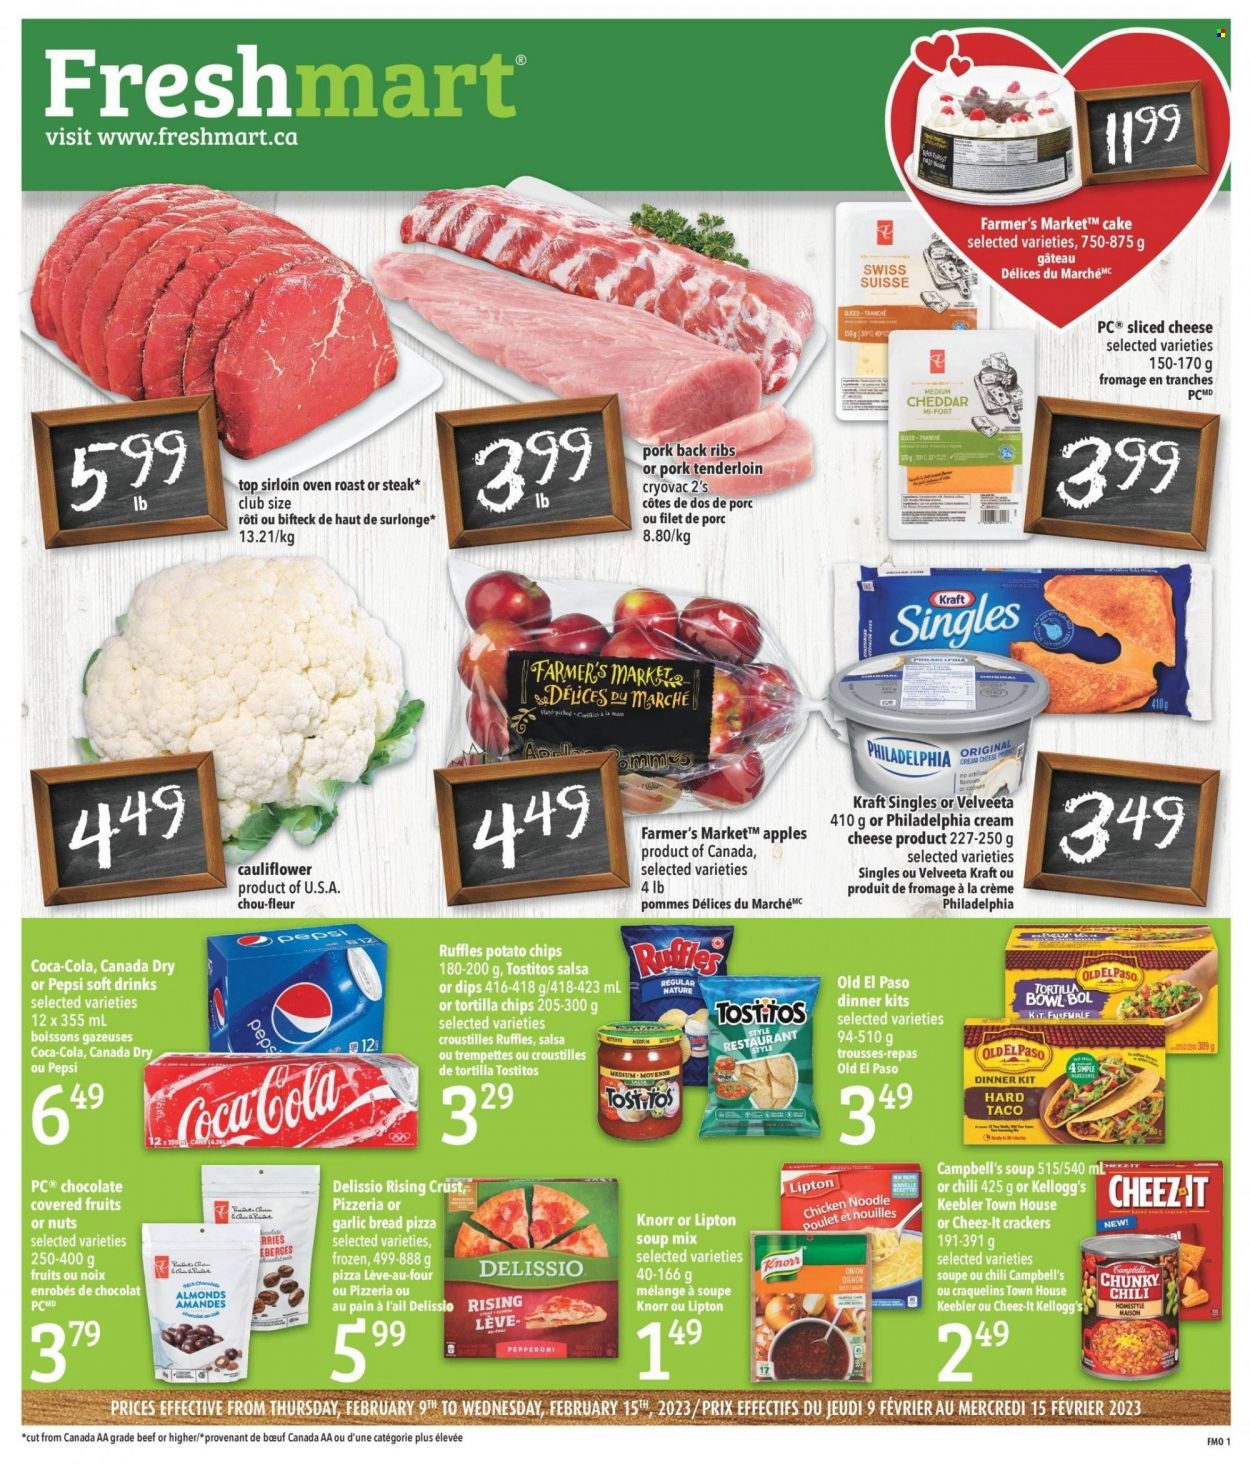 thumbnail - Freshmart Flyer - February 09, 2023 - February 15, 2023 - Sales products - cake, Old El Paso, apples, Campbell's, pizza, soup mix, soup, dinner kit, noodles, Kraft®, pepperoni, cream cheese, sandwich slices, sliced cheese, Kraft Singles, snack, crackers, Kellogg's, Keebler, tortilla chips, potato chips, Cheez-It, Ruffles, Tostitos, salsa, Canada Dry, Coca-Cola, Pepsi, soft drink, ribs, pork meat, pork ribs, pork tenderloin, pork back ribs, Philadelphia, steak, Lipton, Knorr. Page 1.